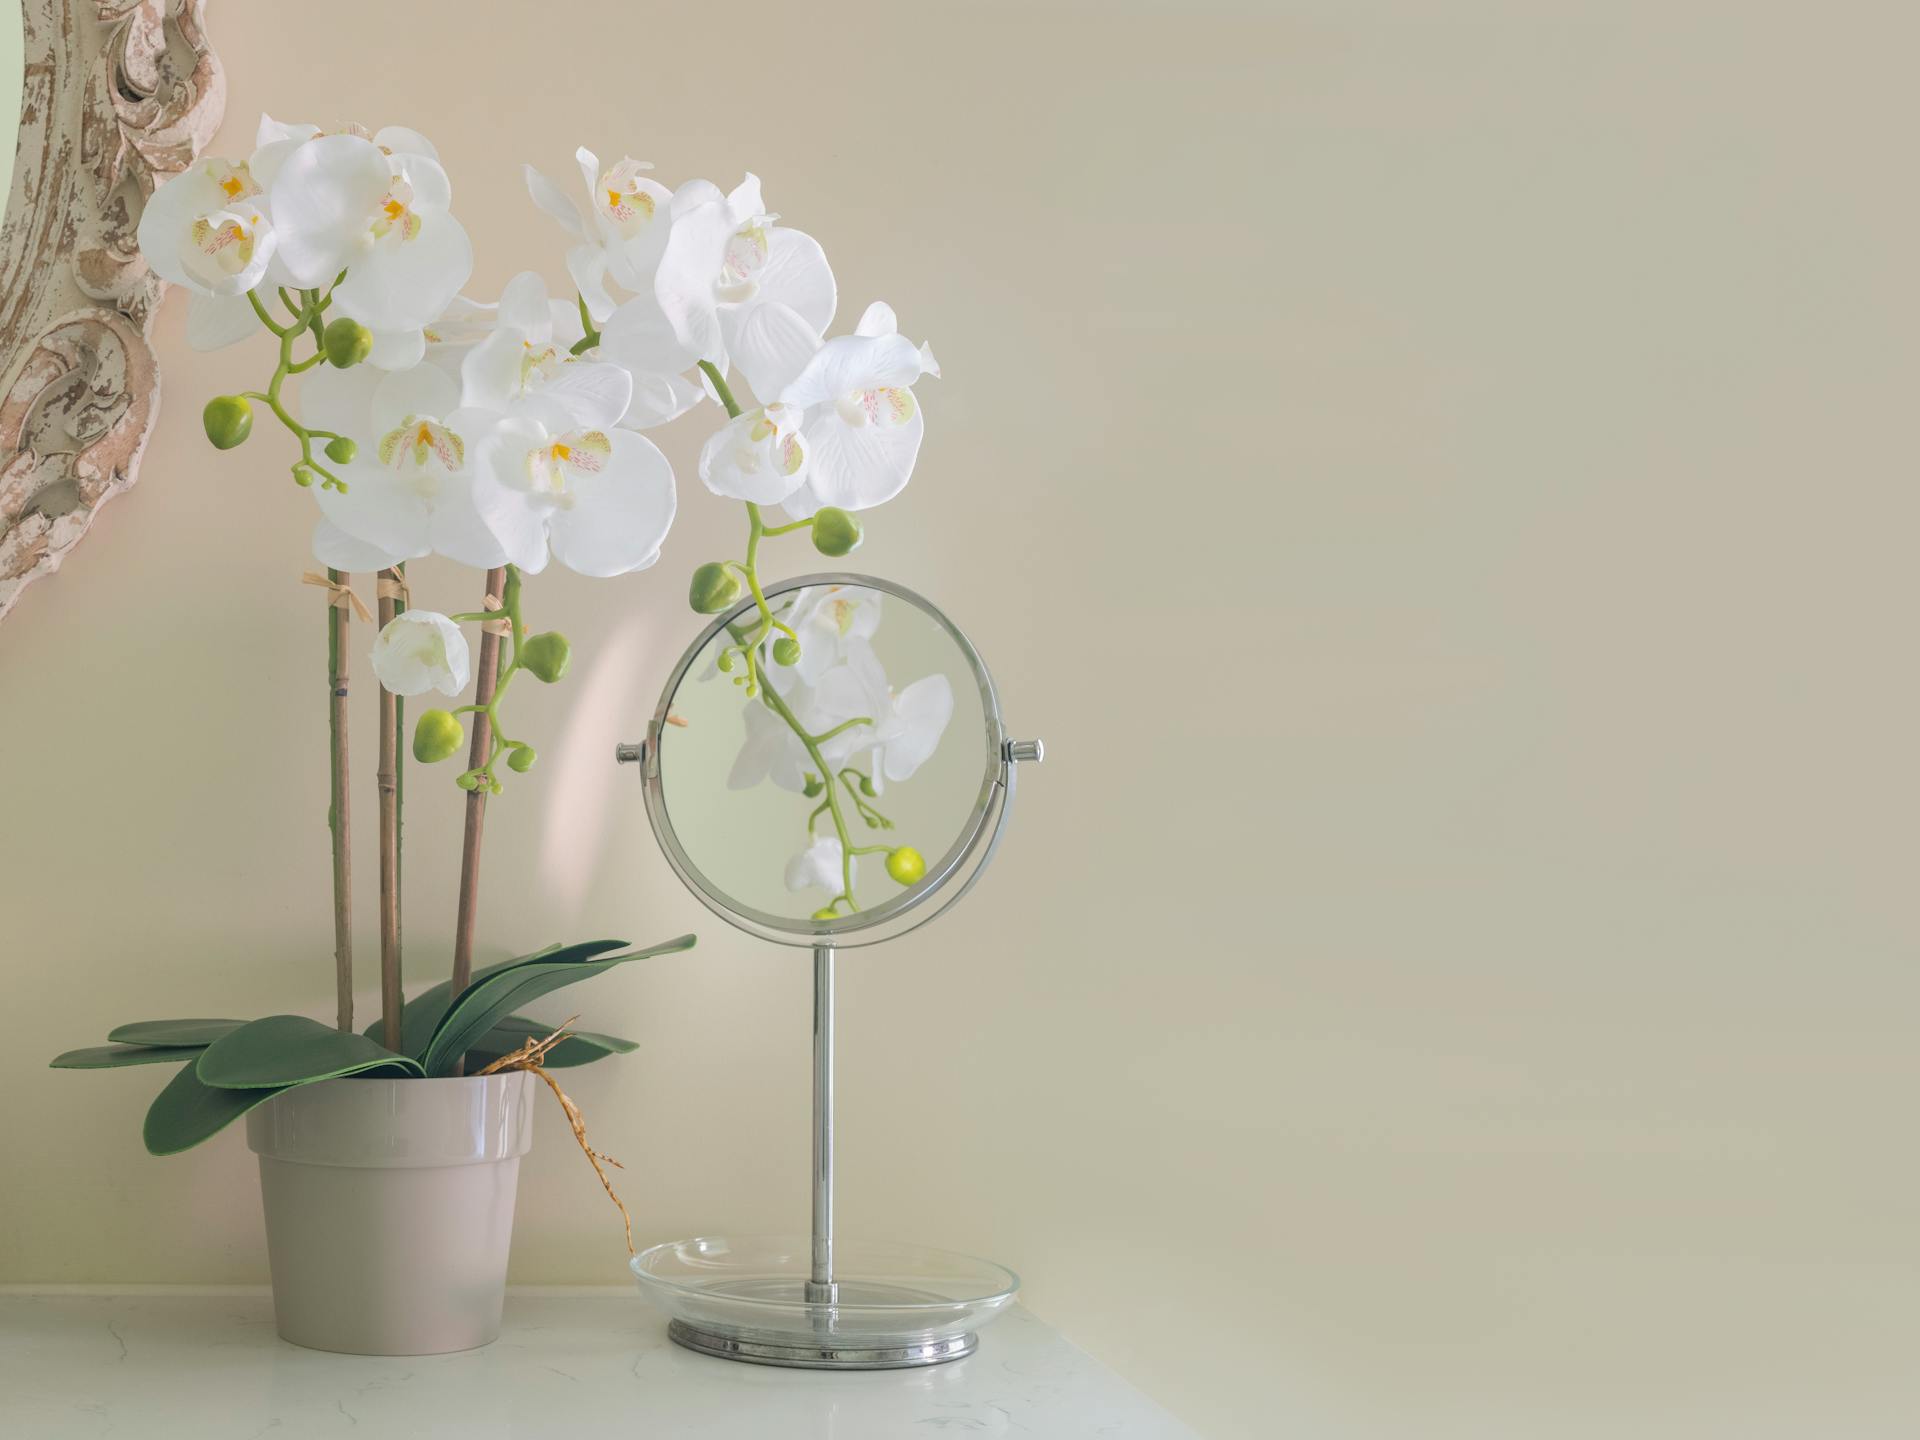 White artificial phalaenopsis orchid in bathroom